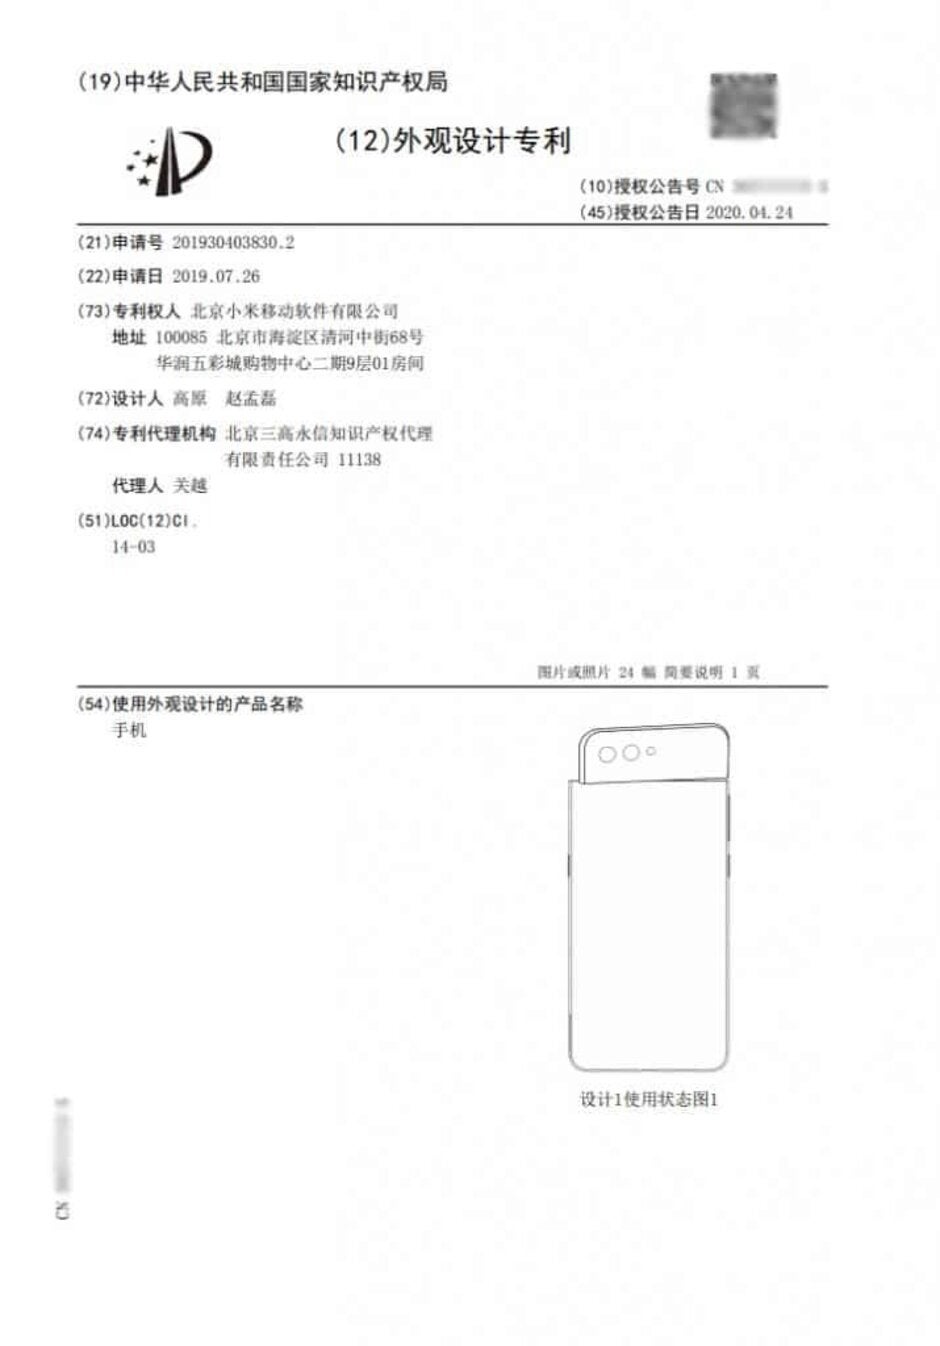 The latest Xiaomi patent features a twisting selfie camera